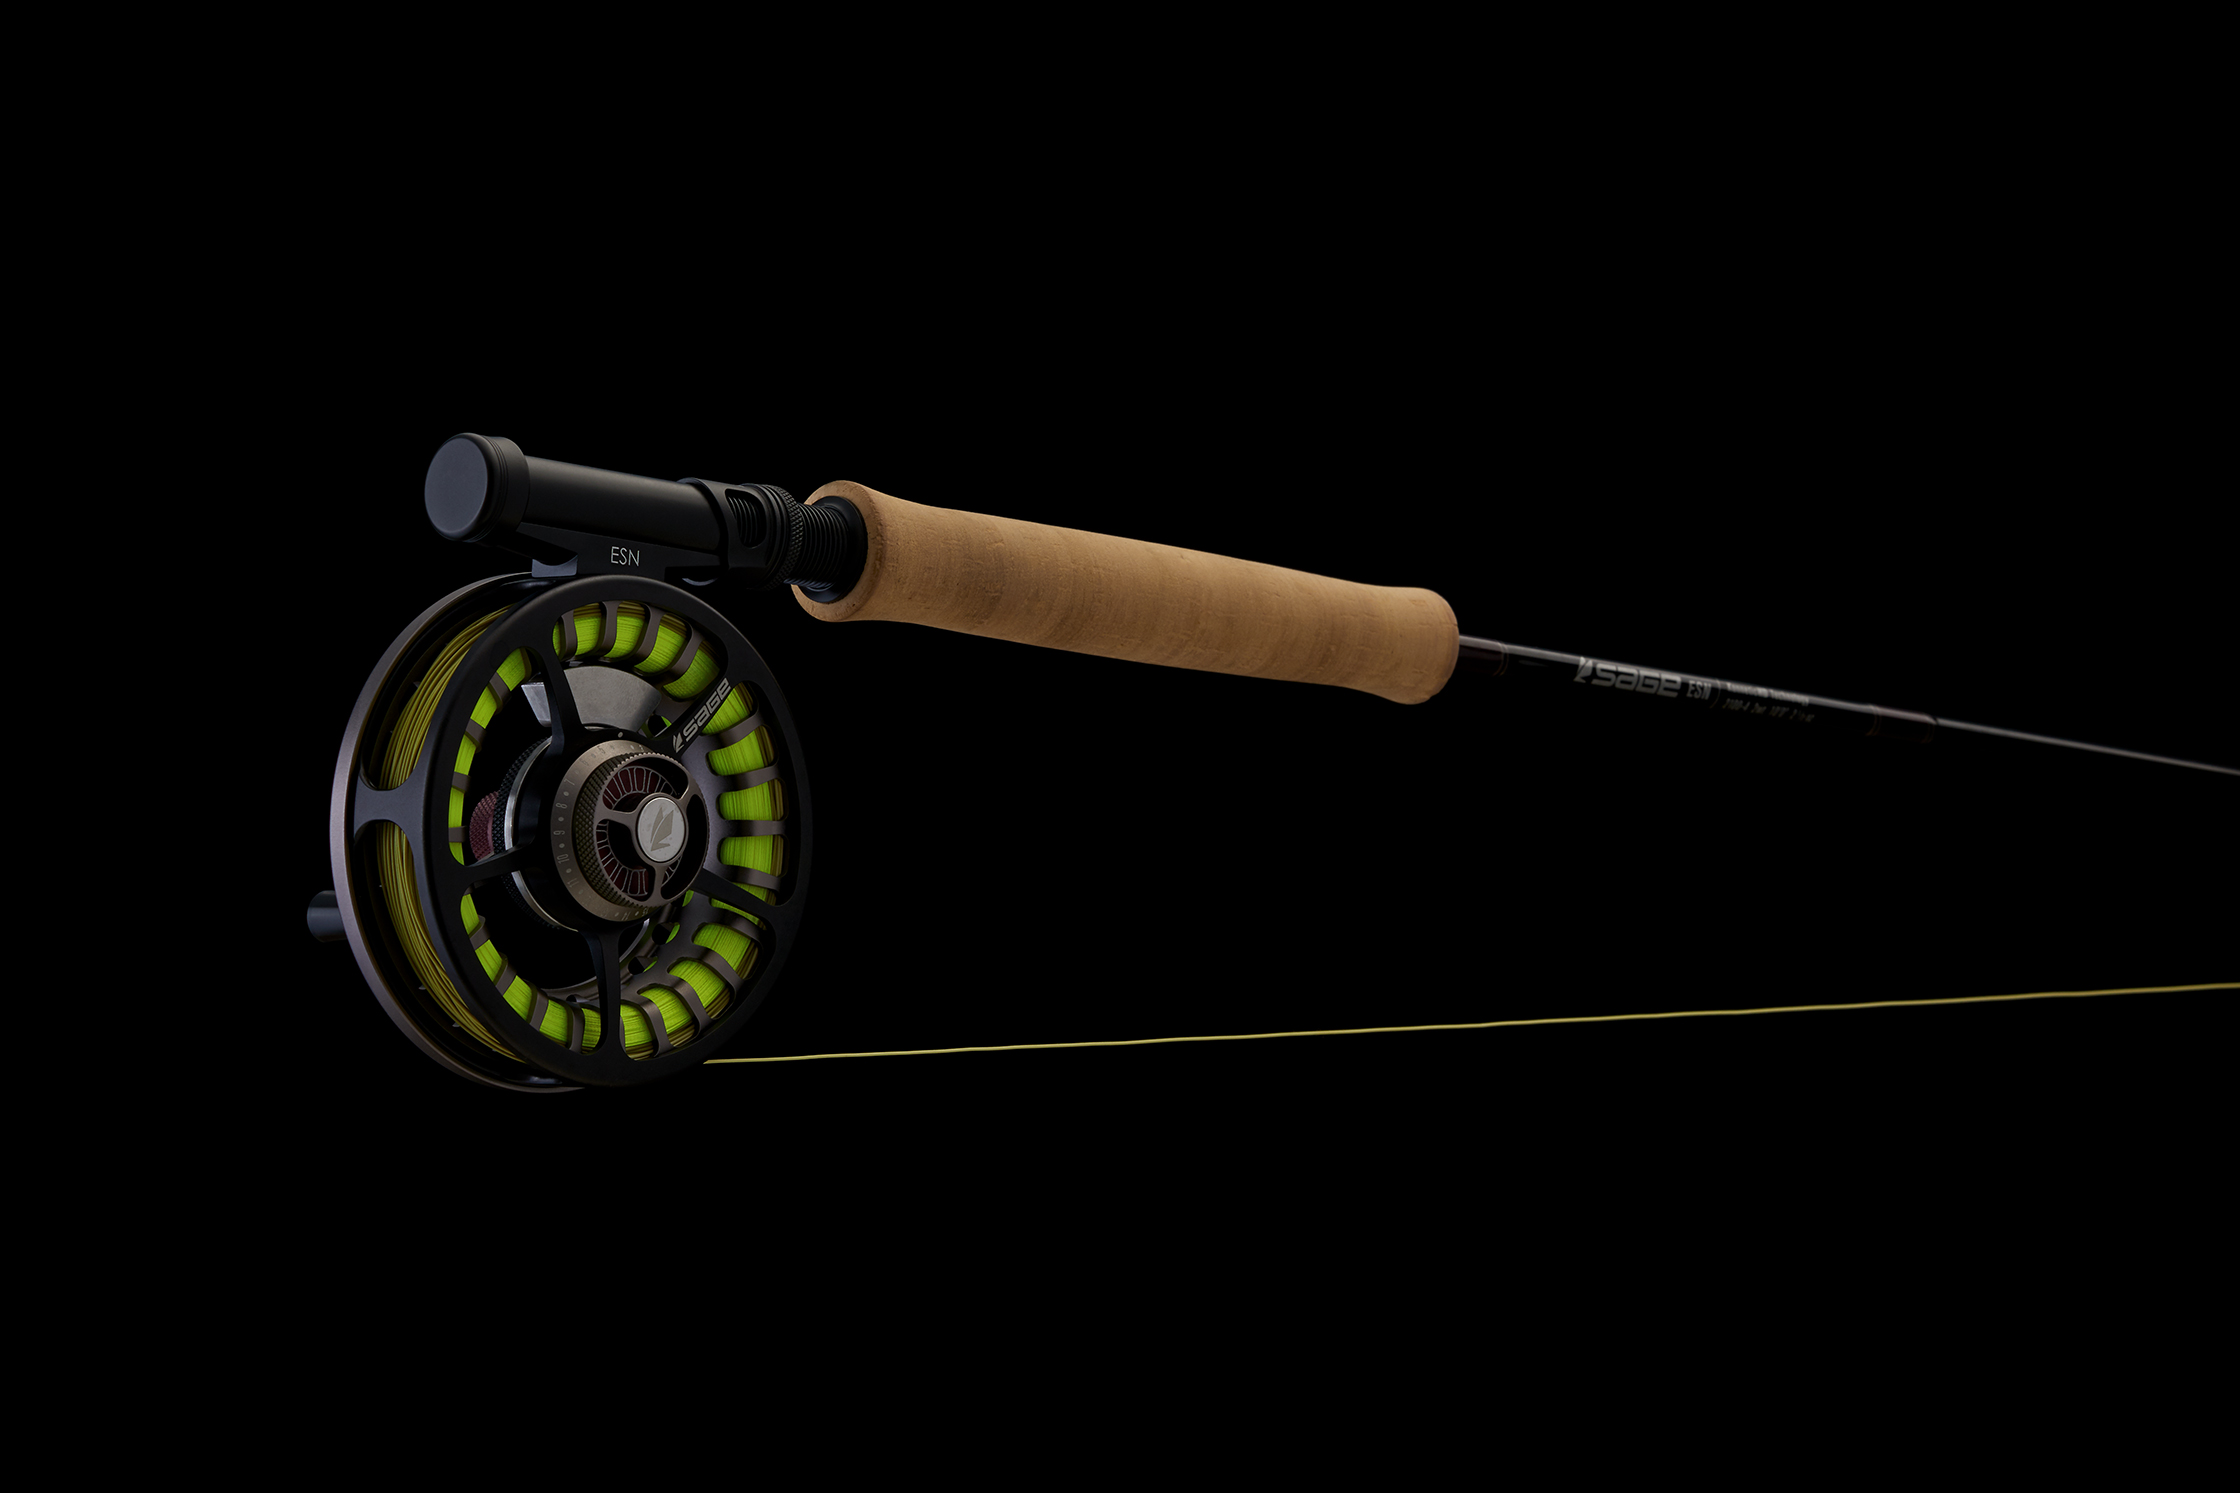 Fly rod product photograph